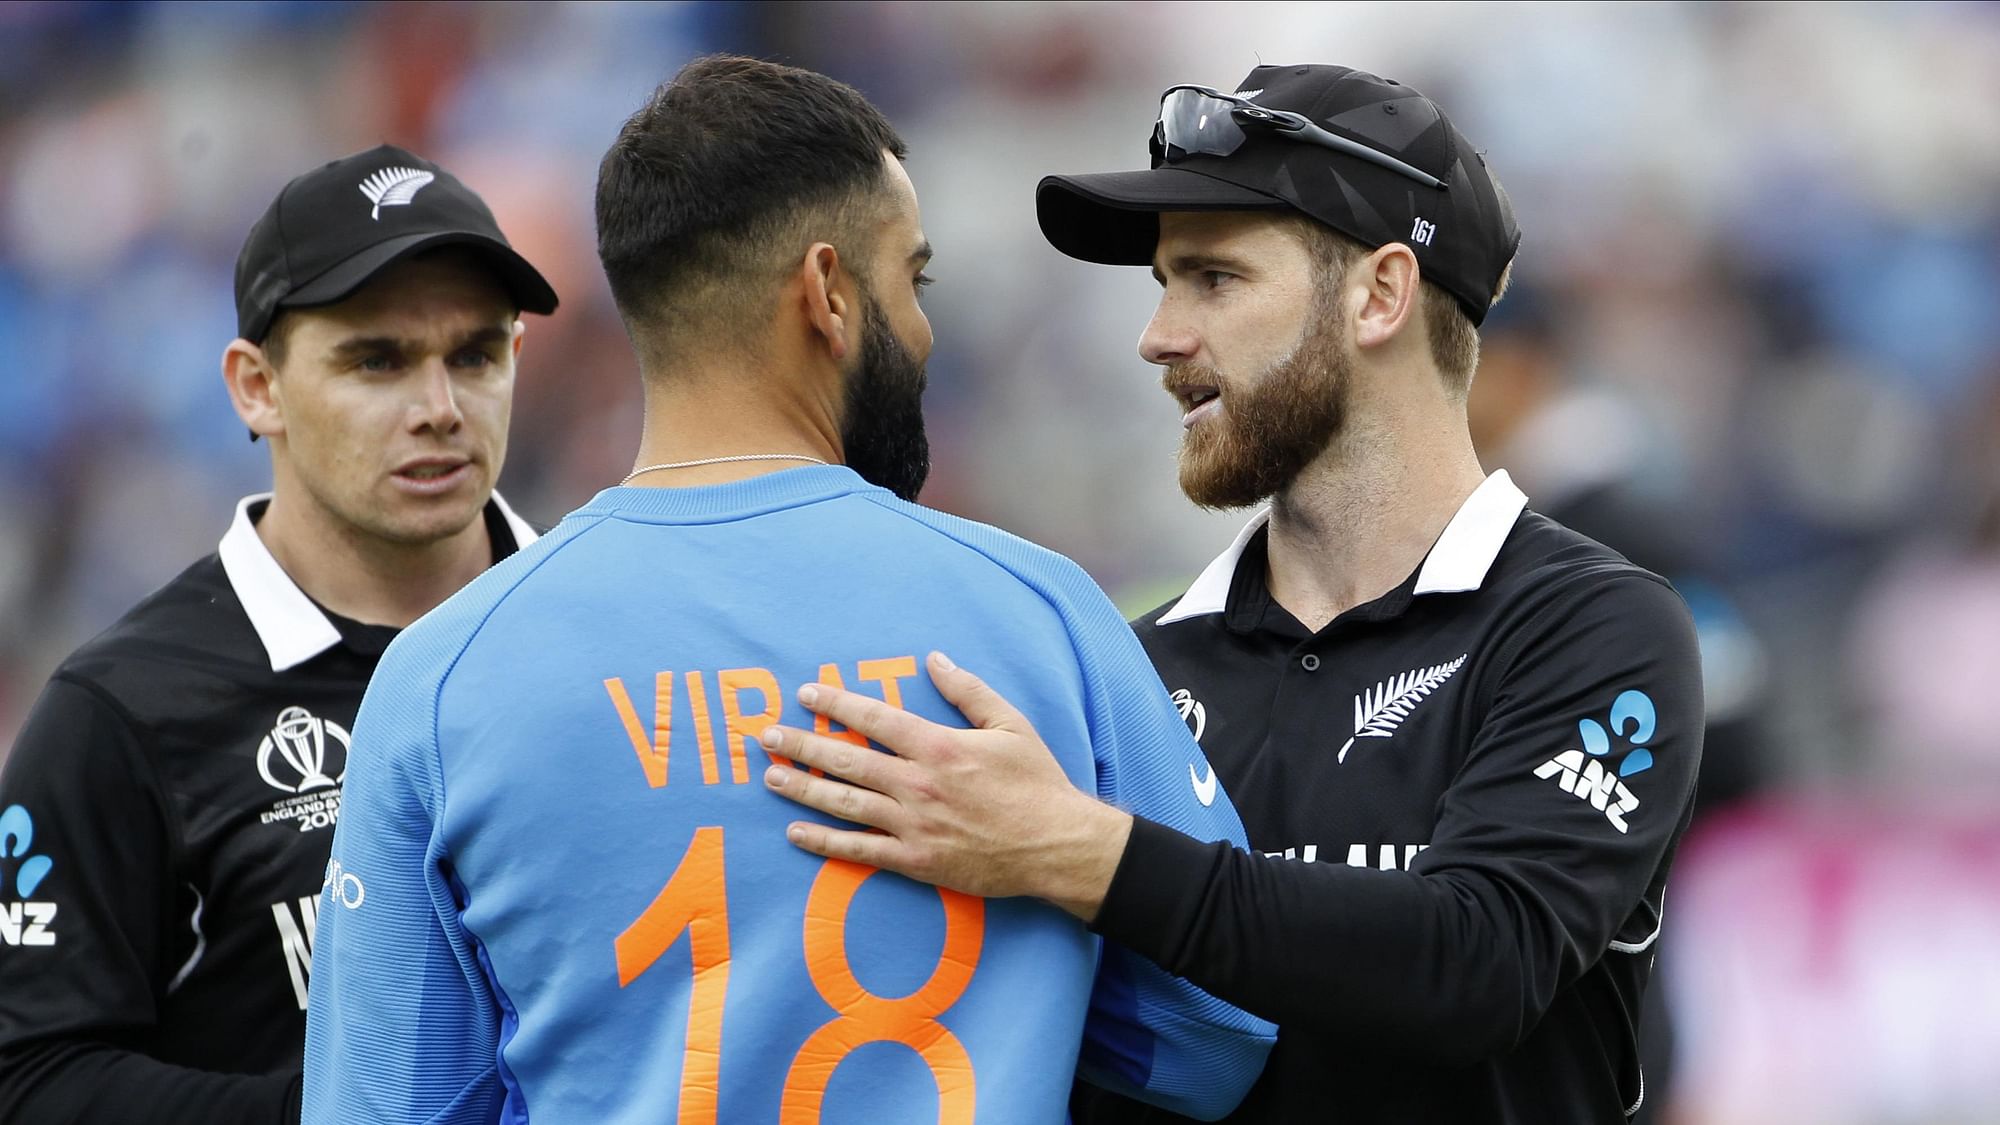 Kane Williamson is congratulated by Virat Kohli as New Zealand qualified for the 2019 World Cup final.